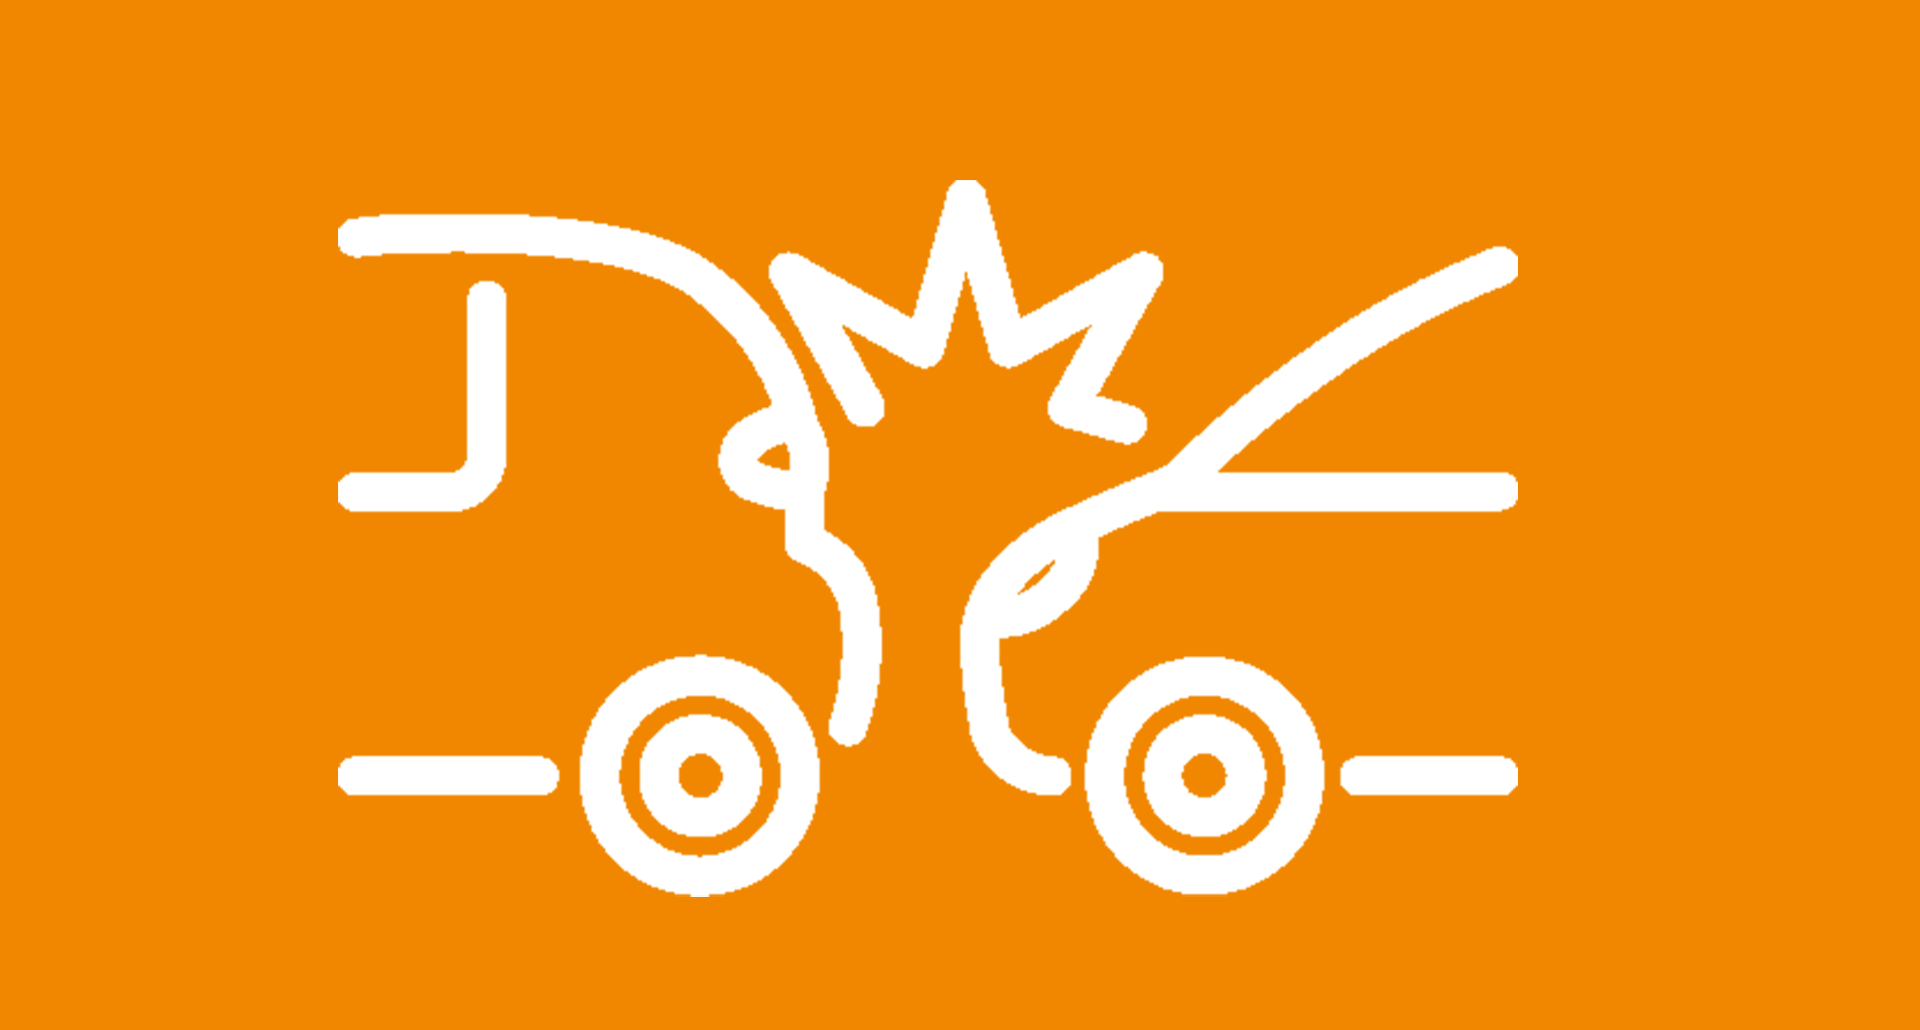 Symbolic image of two cars colliding